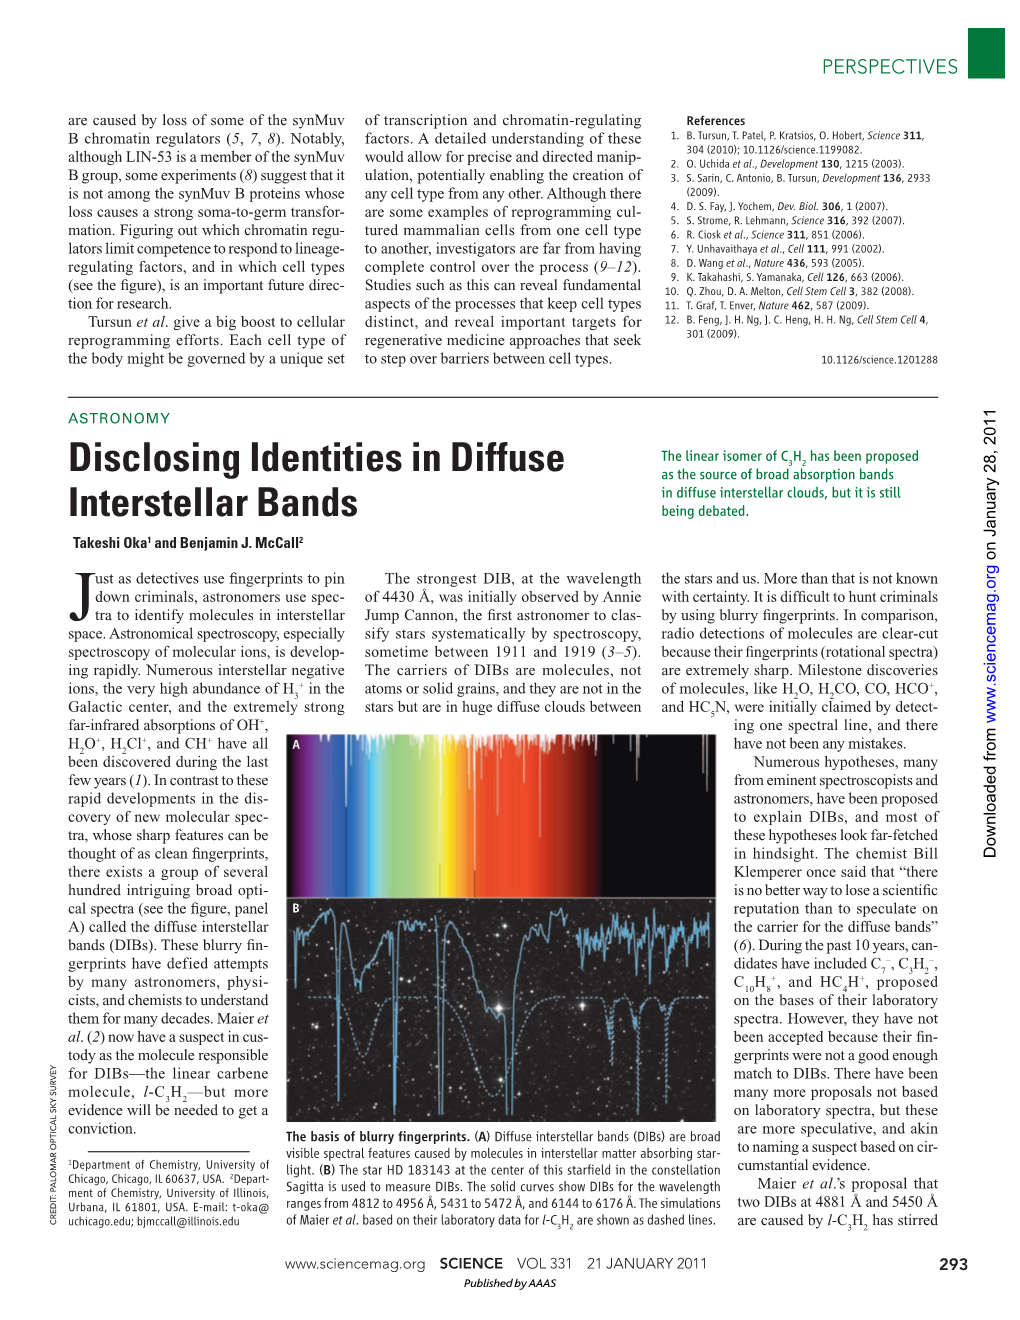 Disclosing Identities in Diffuse Interstellar Bands